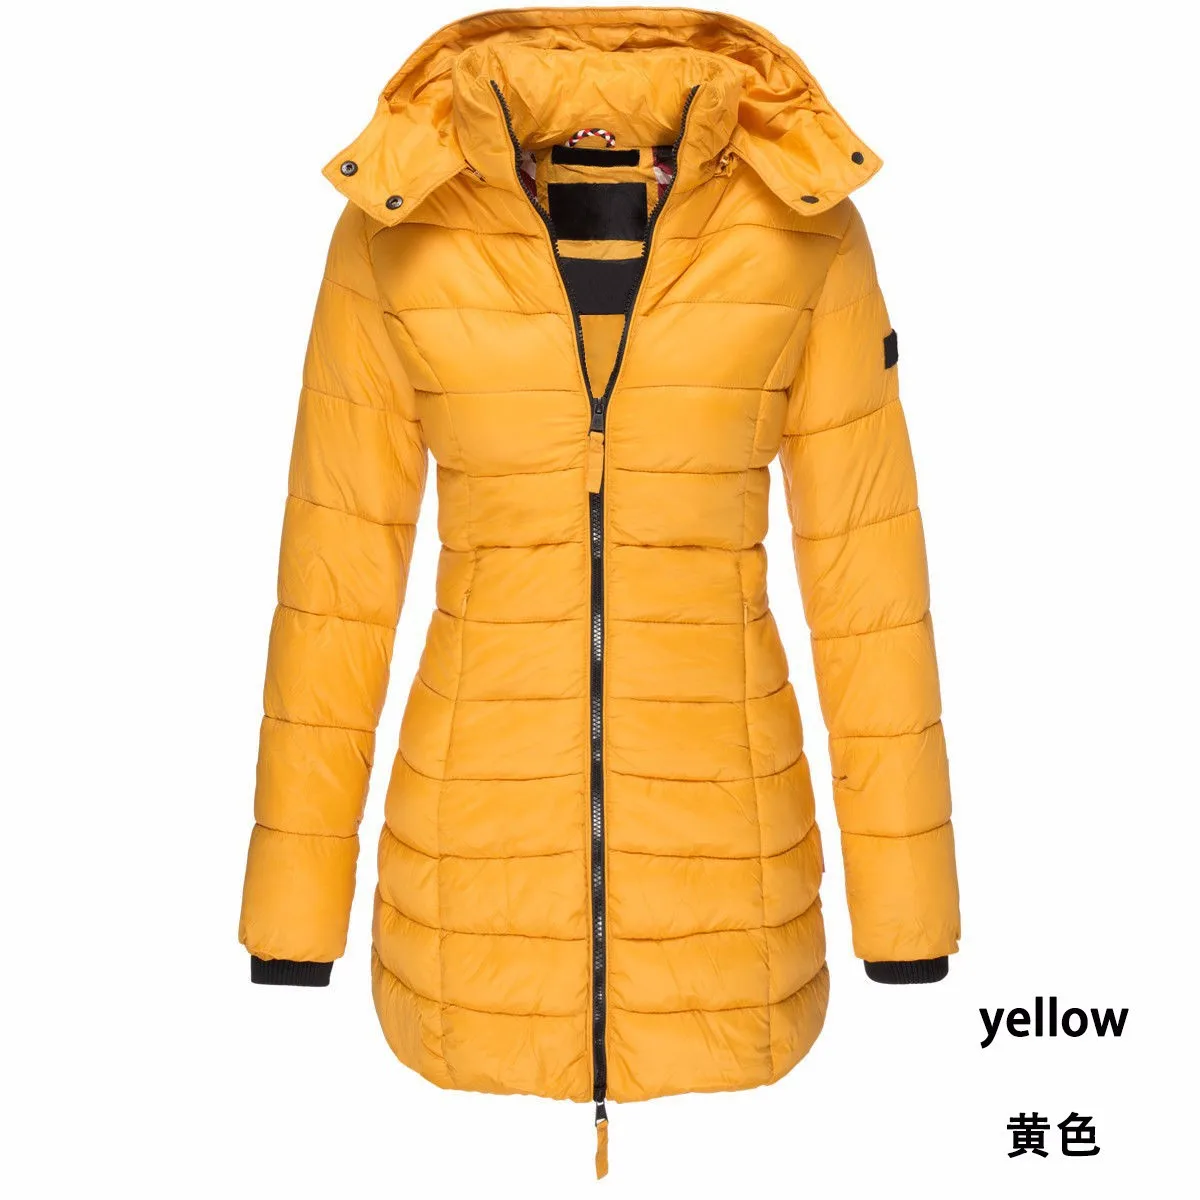 Autumn and Winter Warm Jacket New Women's Mid-length Fashion Slim-fit Padded Jacket Warm Hooded Down Padded Jacket Women's